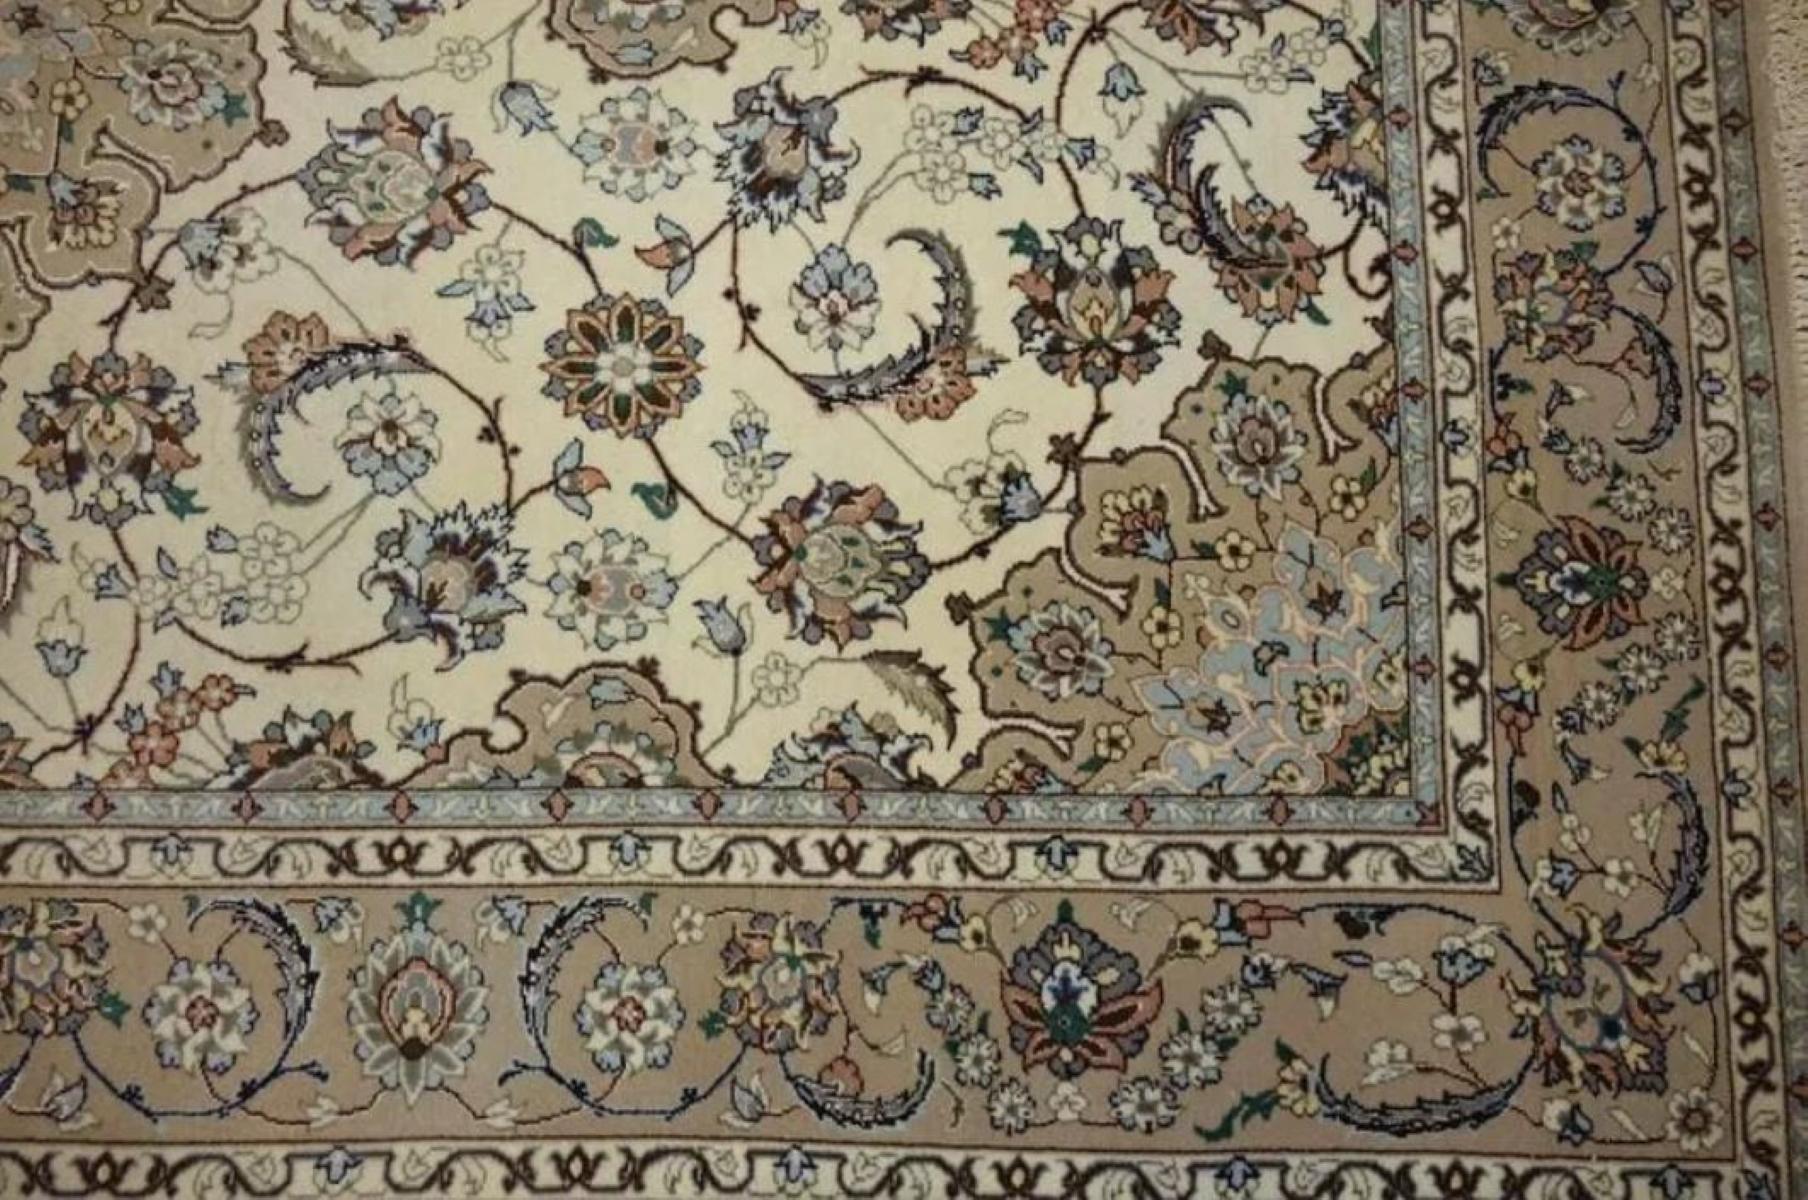 Very fine Persian Rug Isfahan 600 Knots per inch, Size 5 x 8 Iran Isfahan Enteshari Wool and Silk with a Silk Foundation. Around 3,000,000 knots tied by hand one by one. It takes 2 years to complete this piece of art.